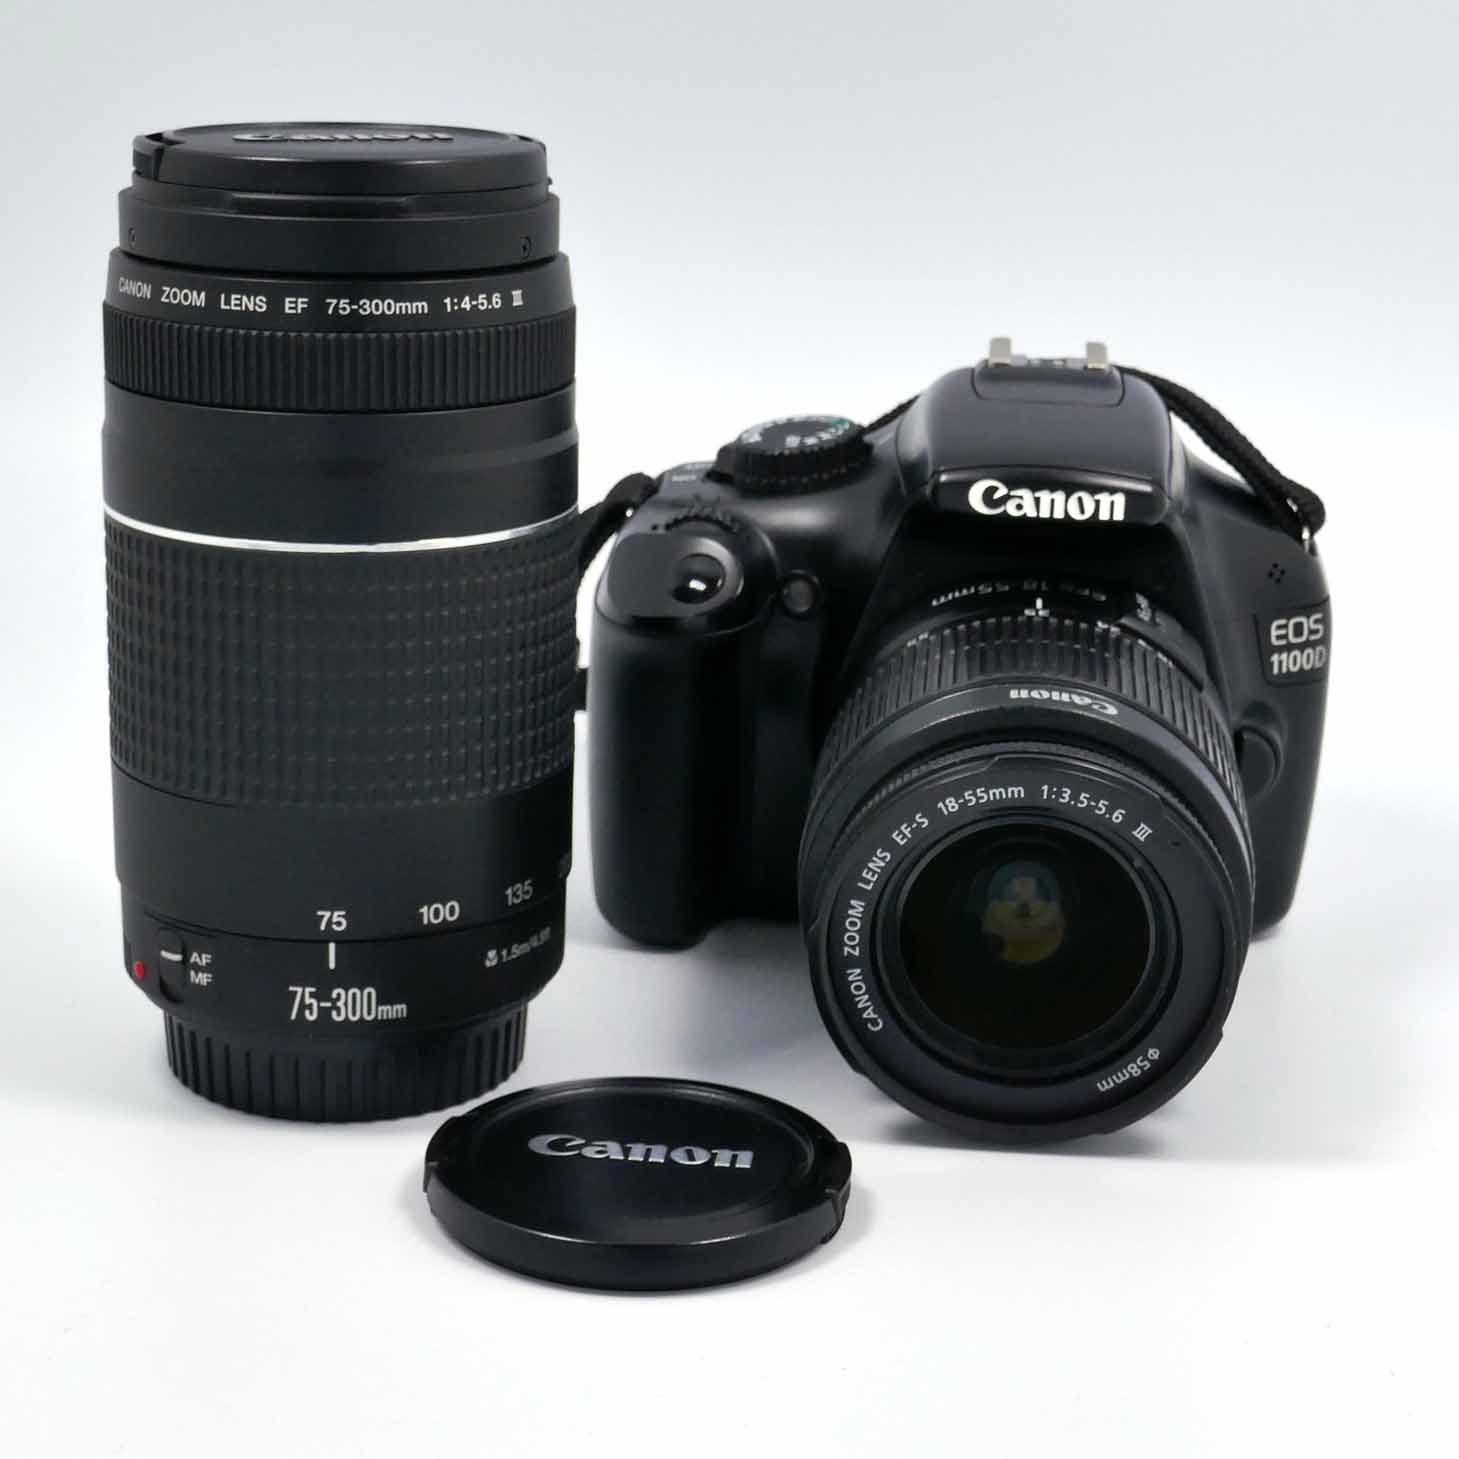  Canon  EOS  1100D  18 55mm 75 300mm Clean Cameras 